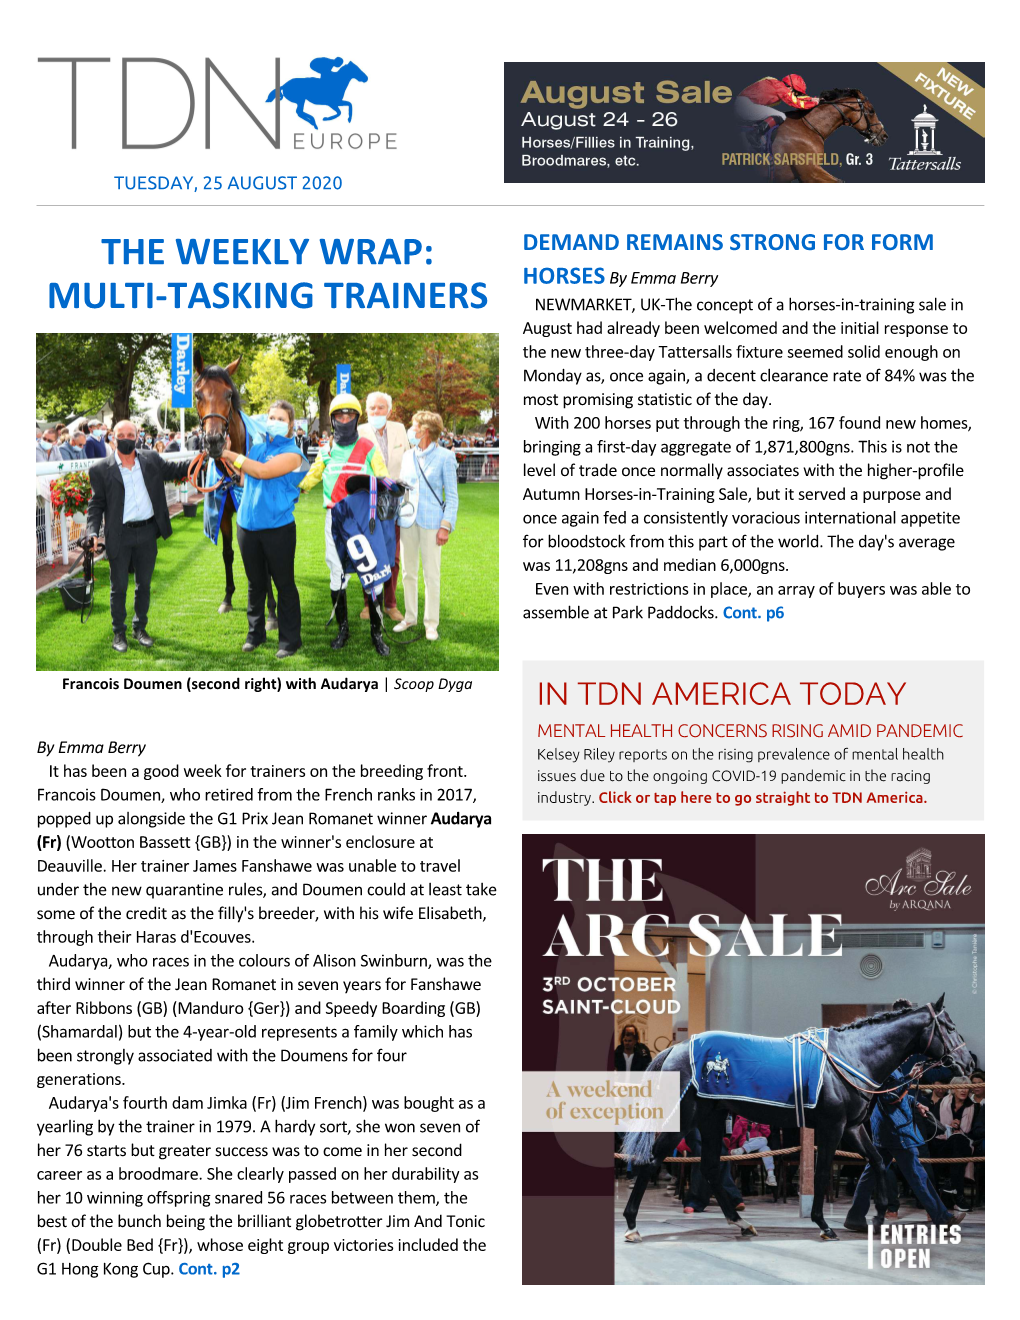 The Weekly Wrap: Multi-Tasking Trainers